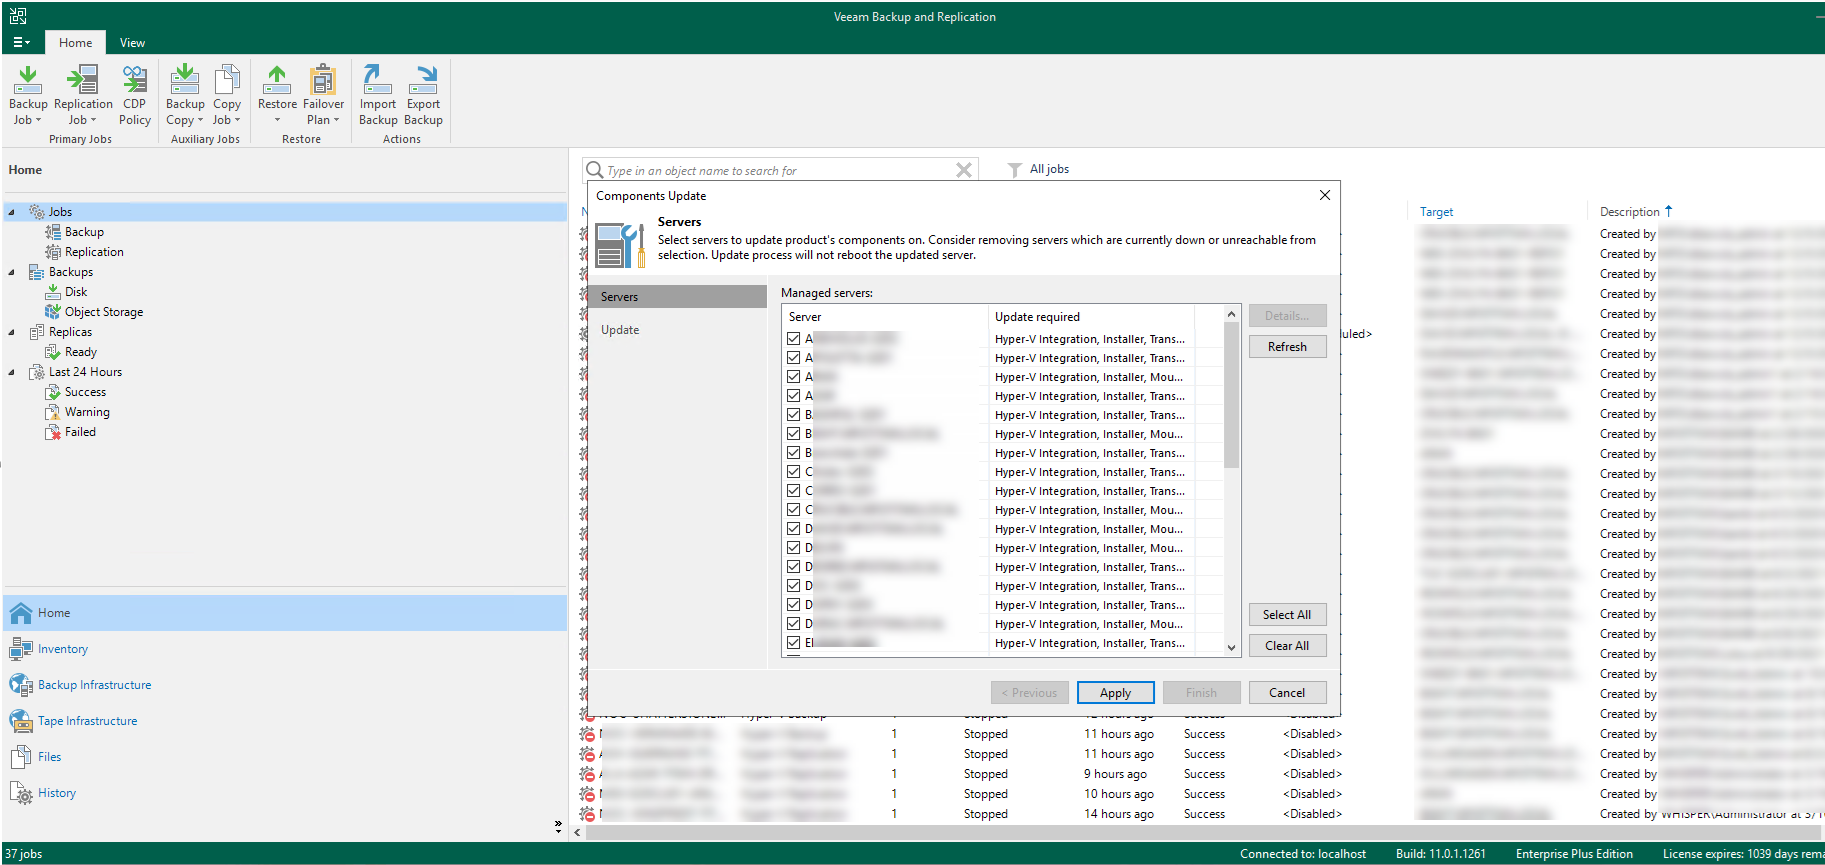 121321 0613 HowtoUpgrad26 - How to Upgrade Veeam Backup and Replication to v11a